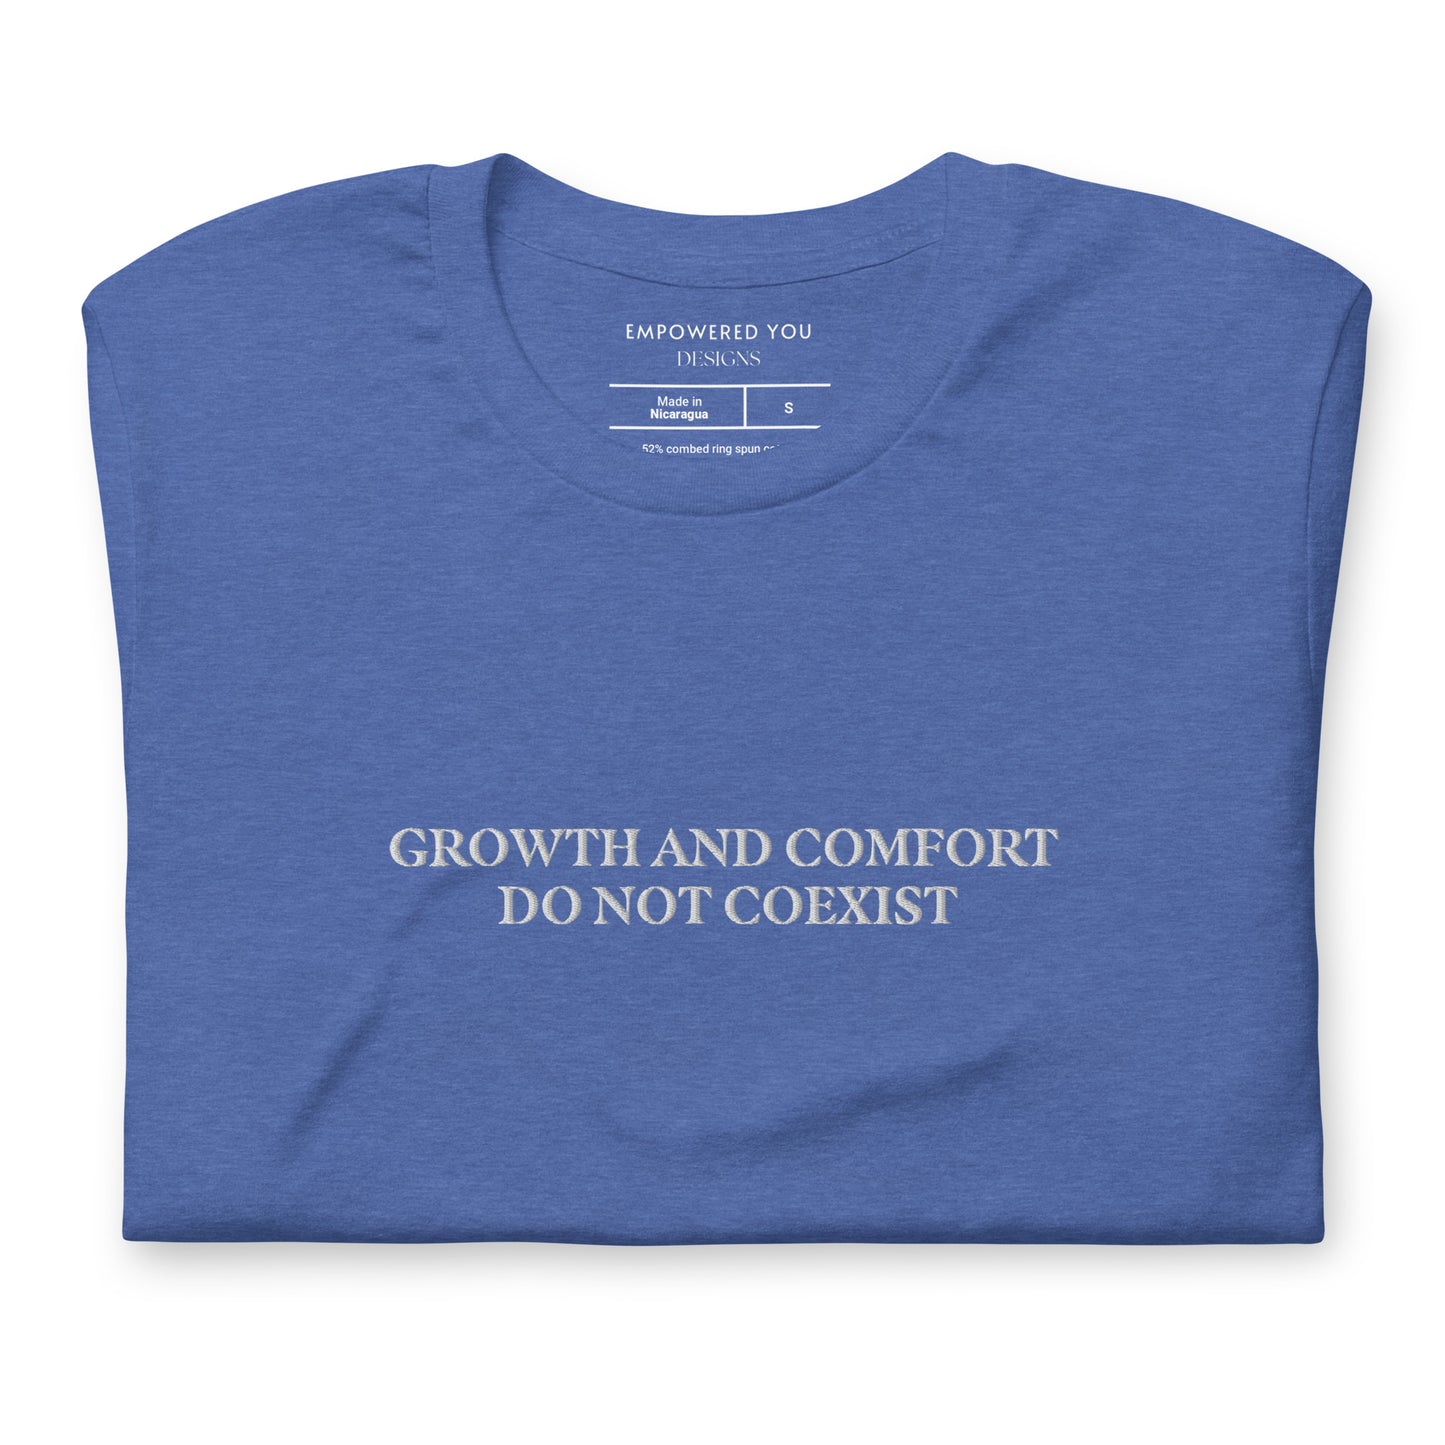 "GROWTH AND COMFORT DO NOT COEXIST" Embroidered T-Shirt